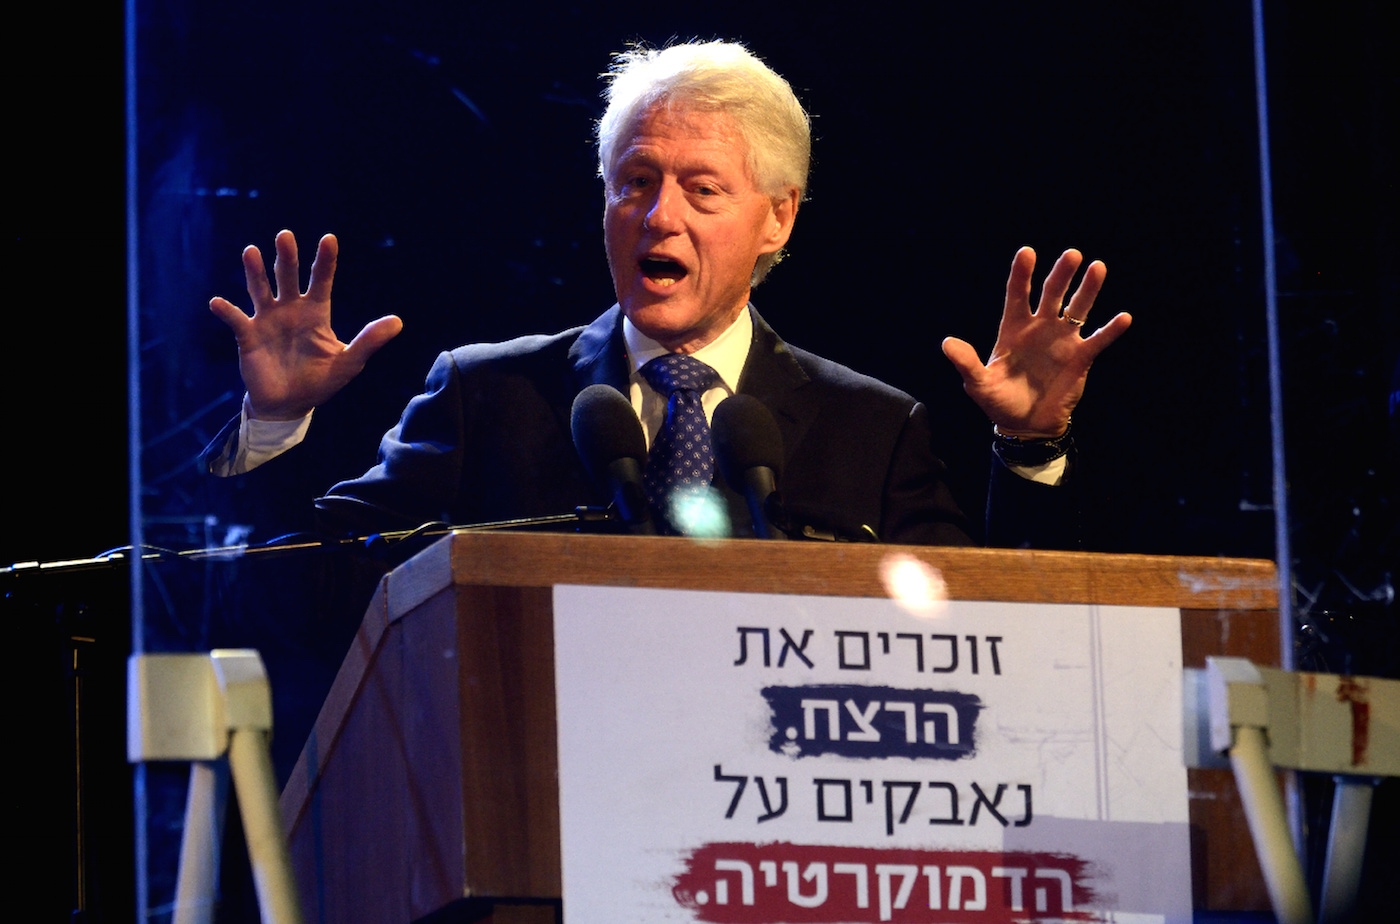 Former U.S. President president Bill Clinton speaking at a rally in Tel Aviv to mark 20 years since the assassination of Prime Minister Yitzhak Rabin. (Gili Yaari/Flash90)